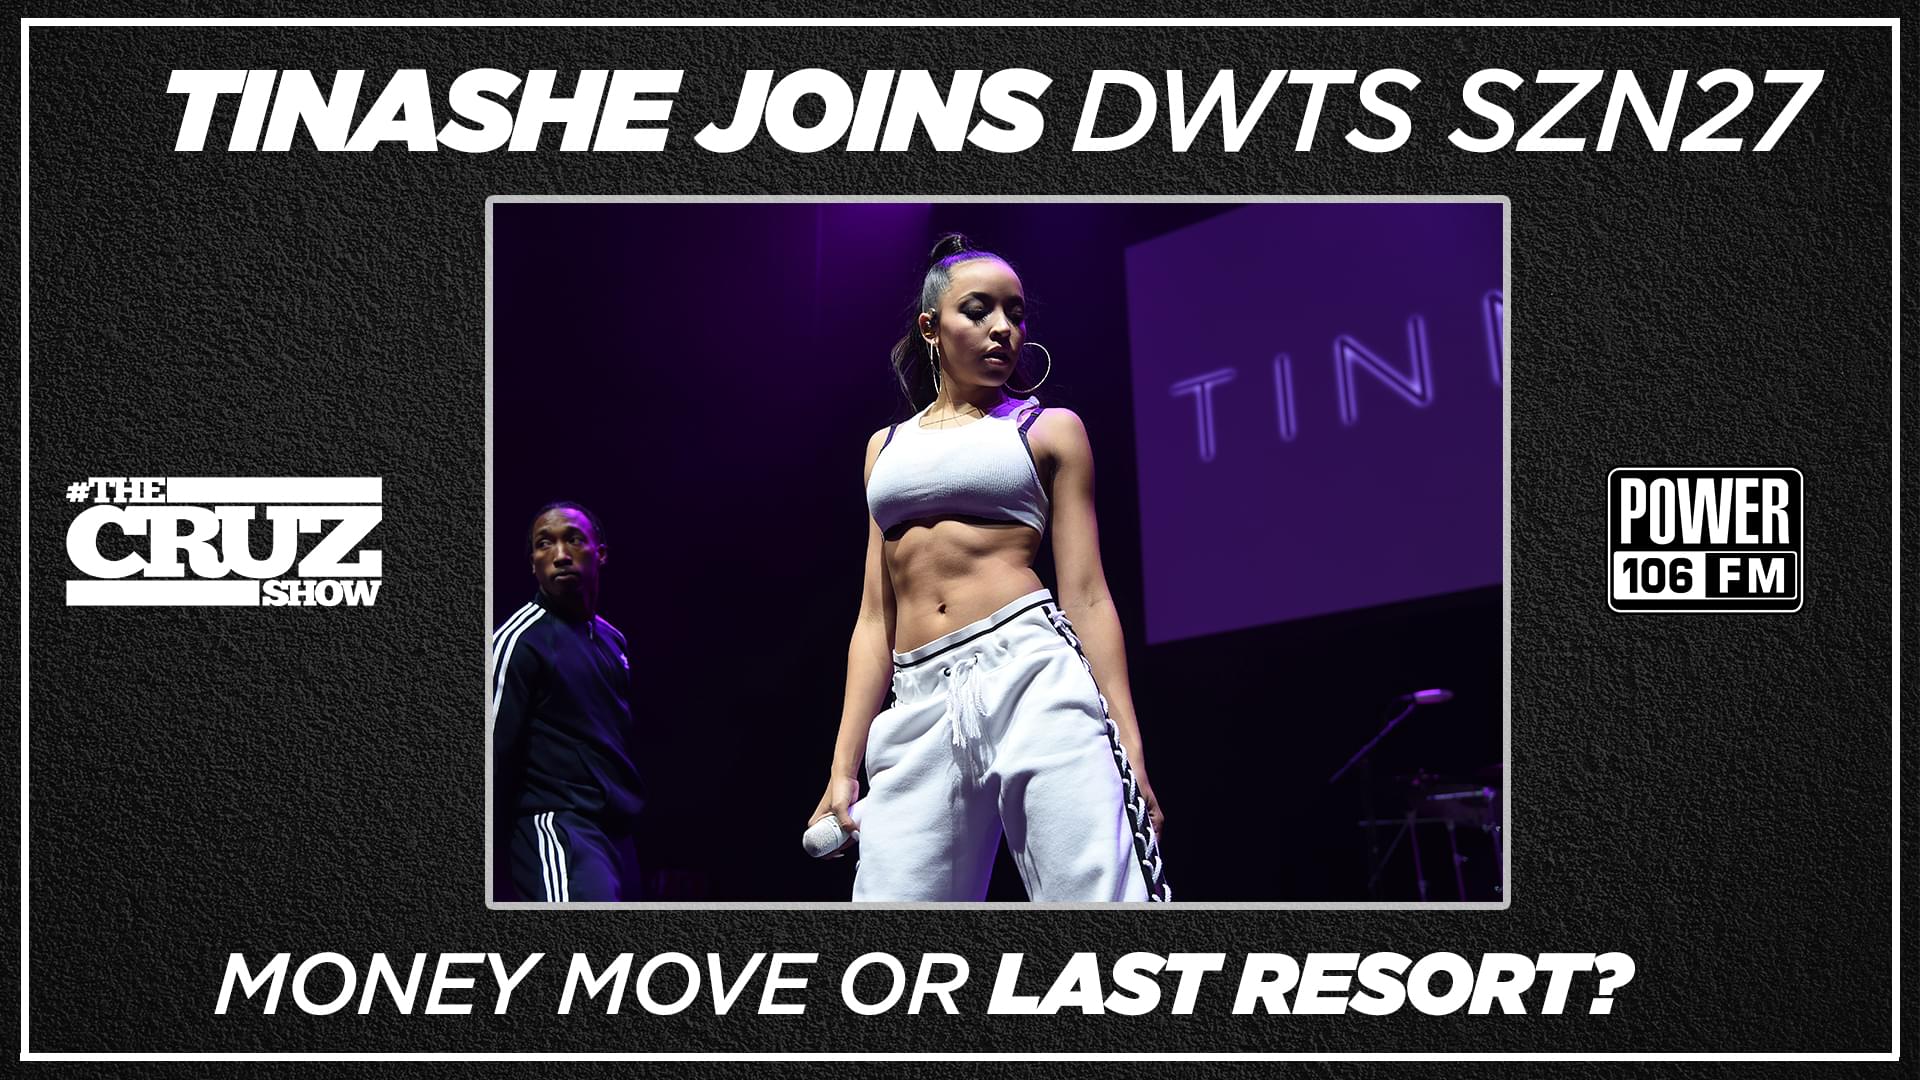 The Cruz Show Debates Tinashe Joining Dancing with the Stars: Money Move or Last Resort?